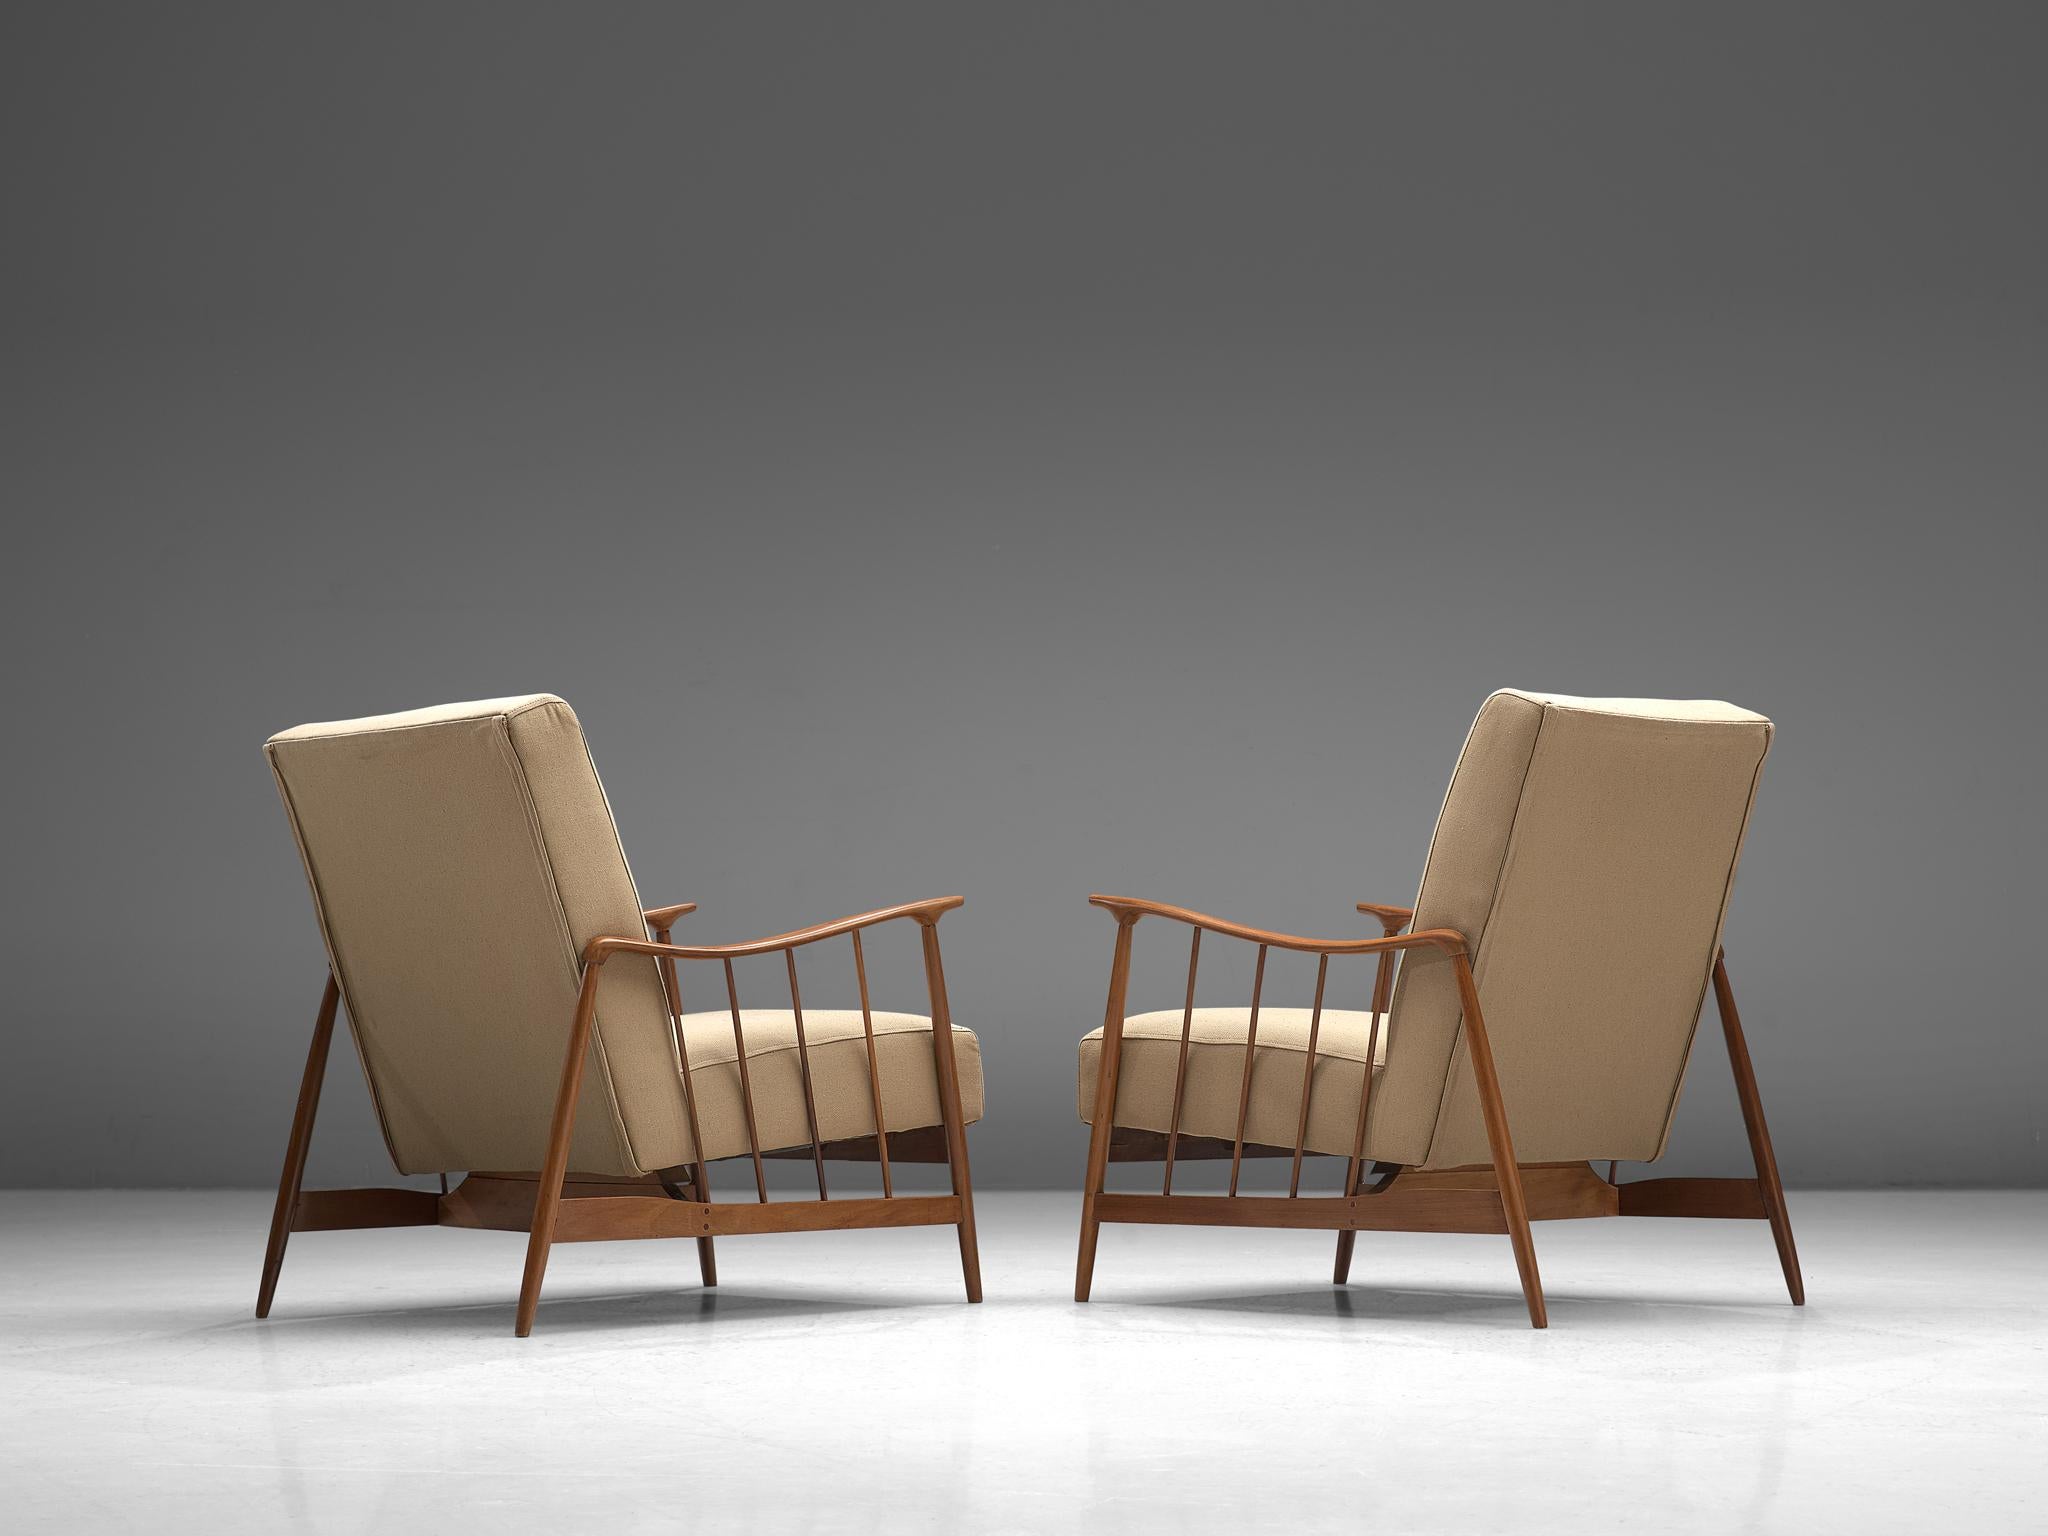 Mid-20th Century Móveis Cimo Pair of Lounge Chairs in Teak and Beige Upholstery